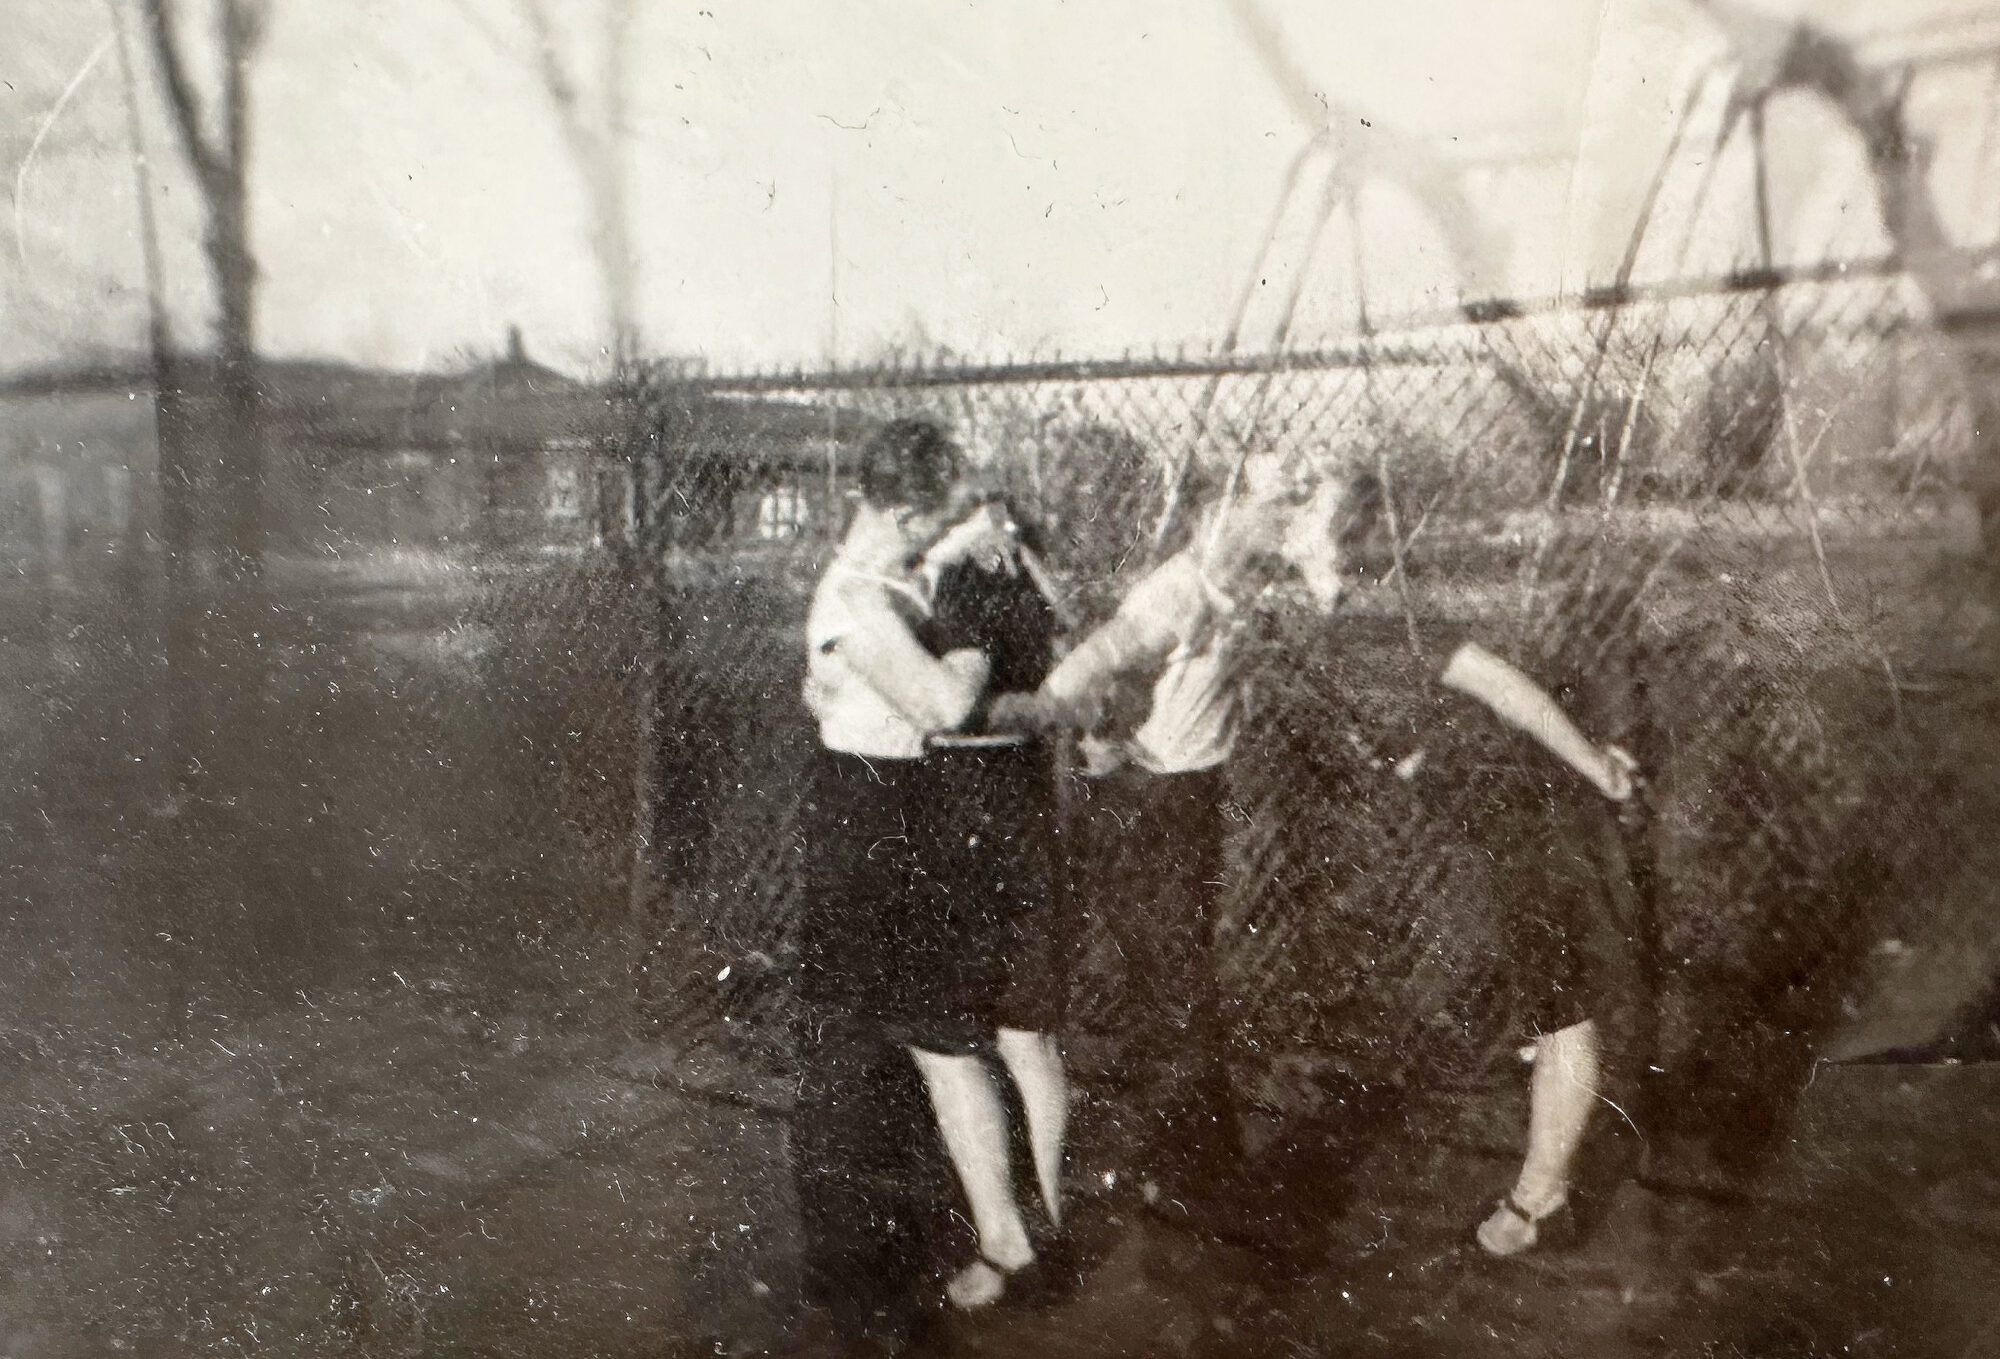 Black and white photo of a man and woman kissing next to a chainlink fence.